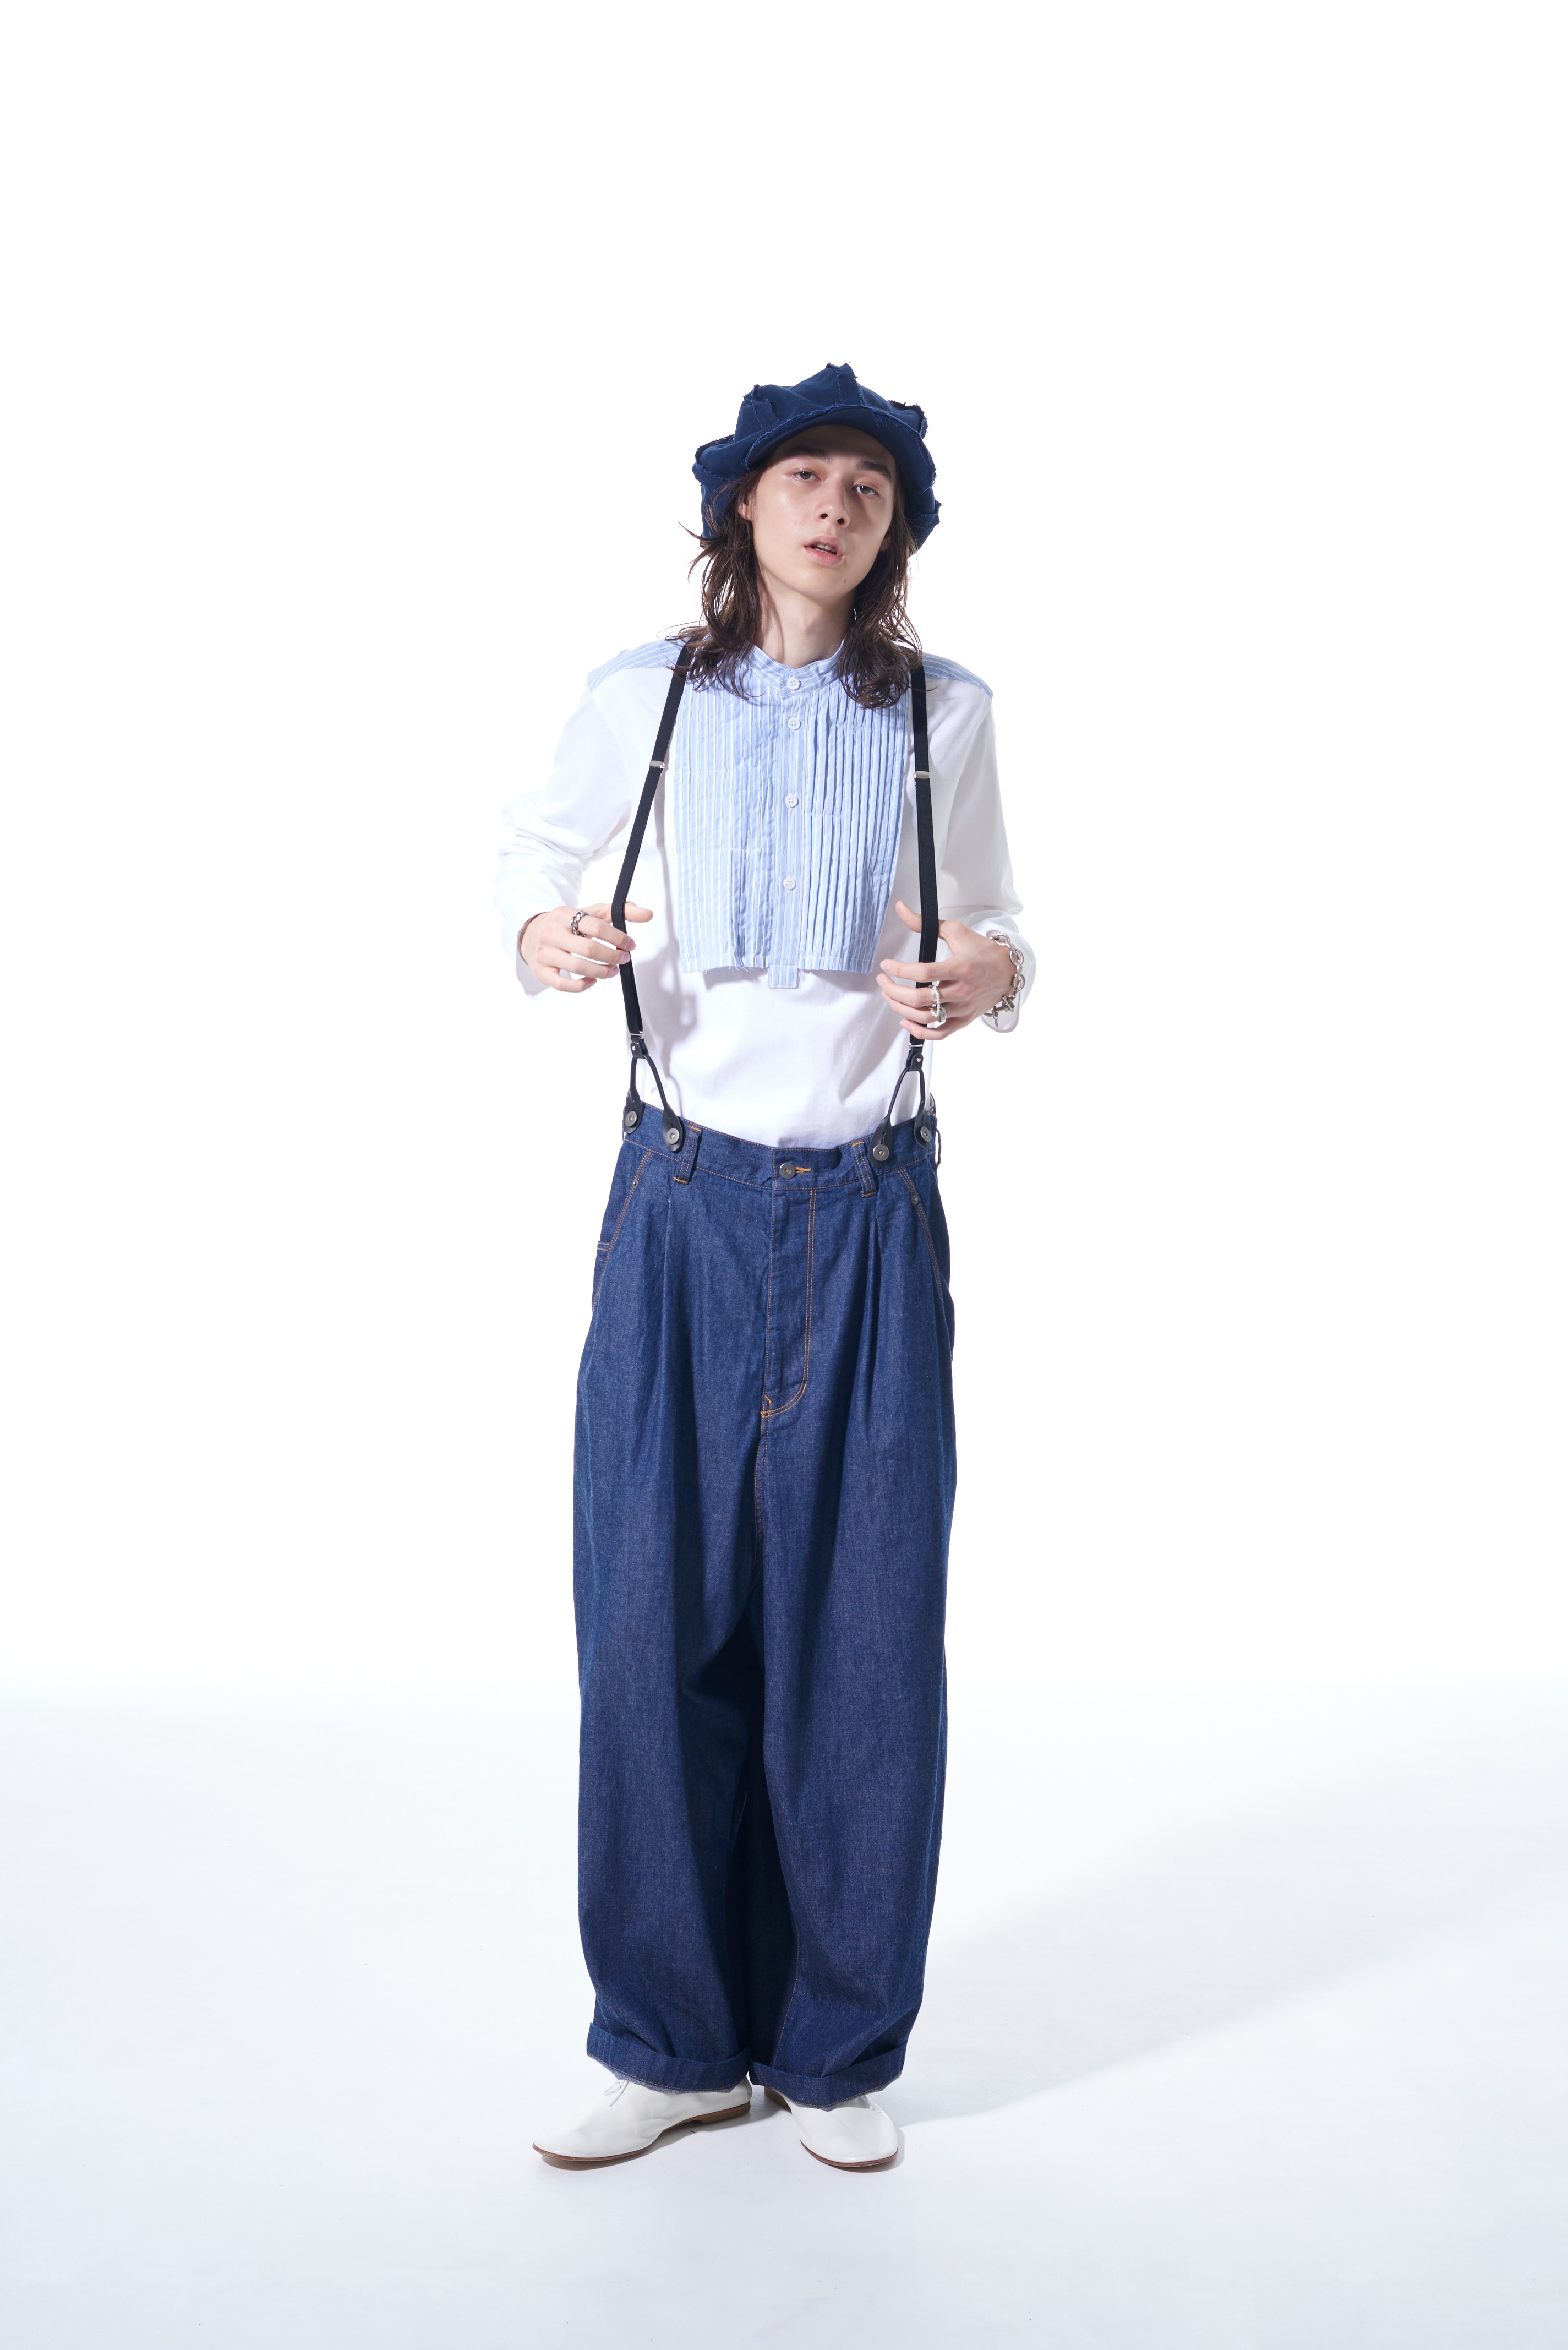 8OZ DENIM BUGGY PANTS WITH SUSPENDER BUTTONS